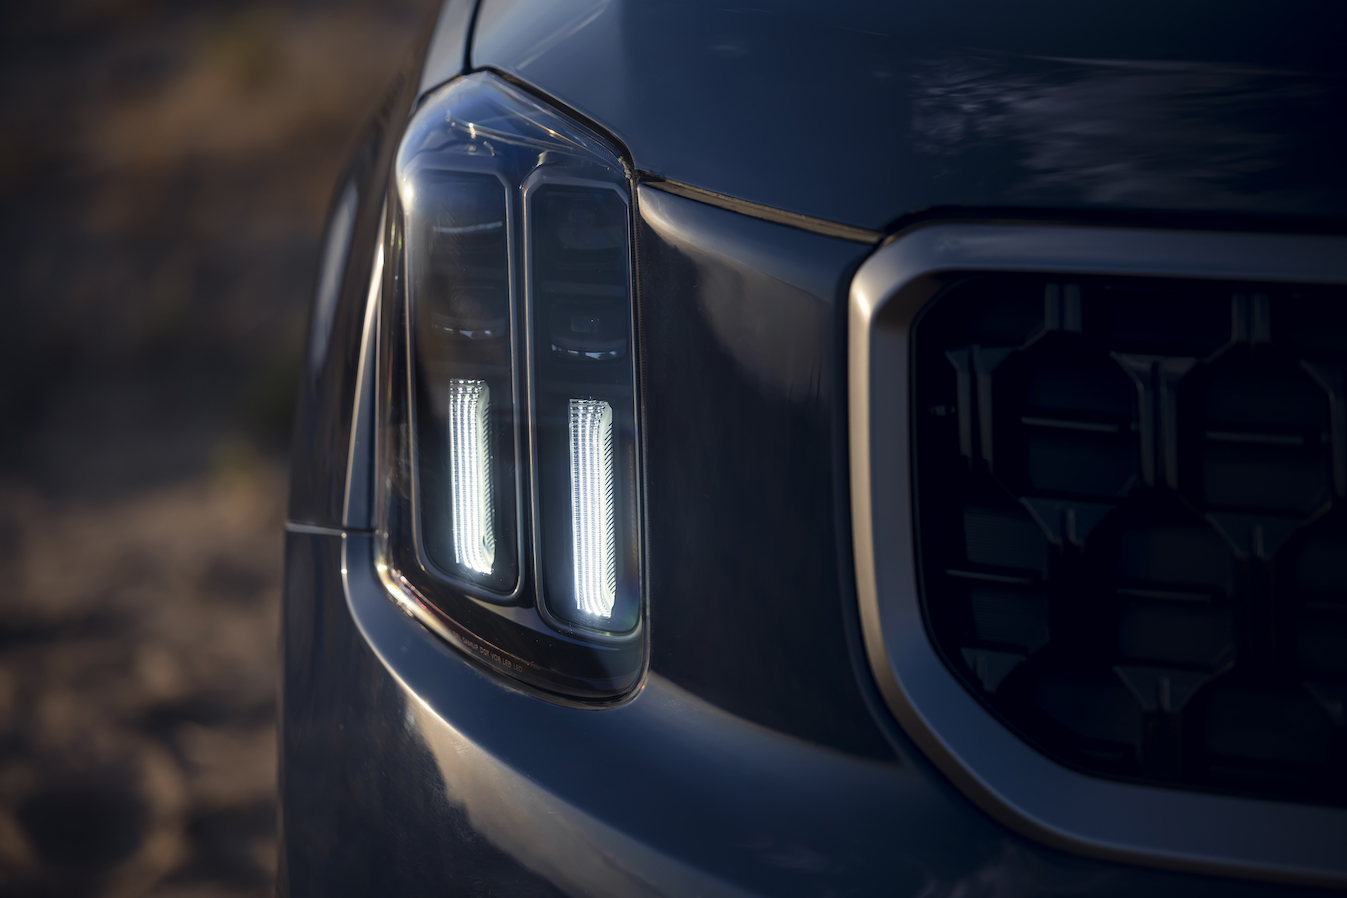 The front grille of the 2023 Kia Telluride, worth buying for sure, parked at sunset.